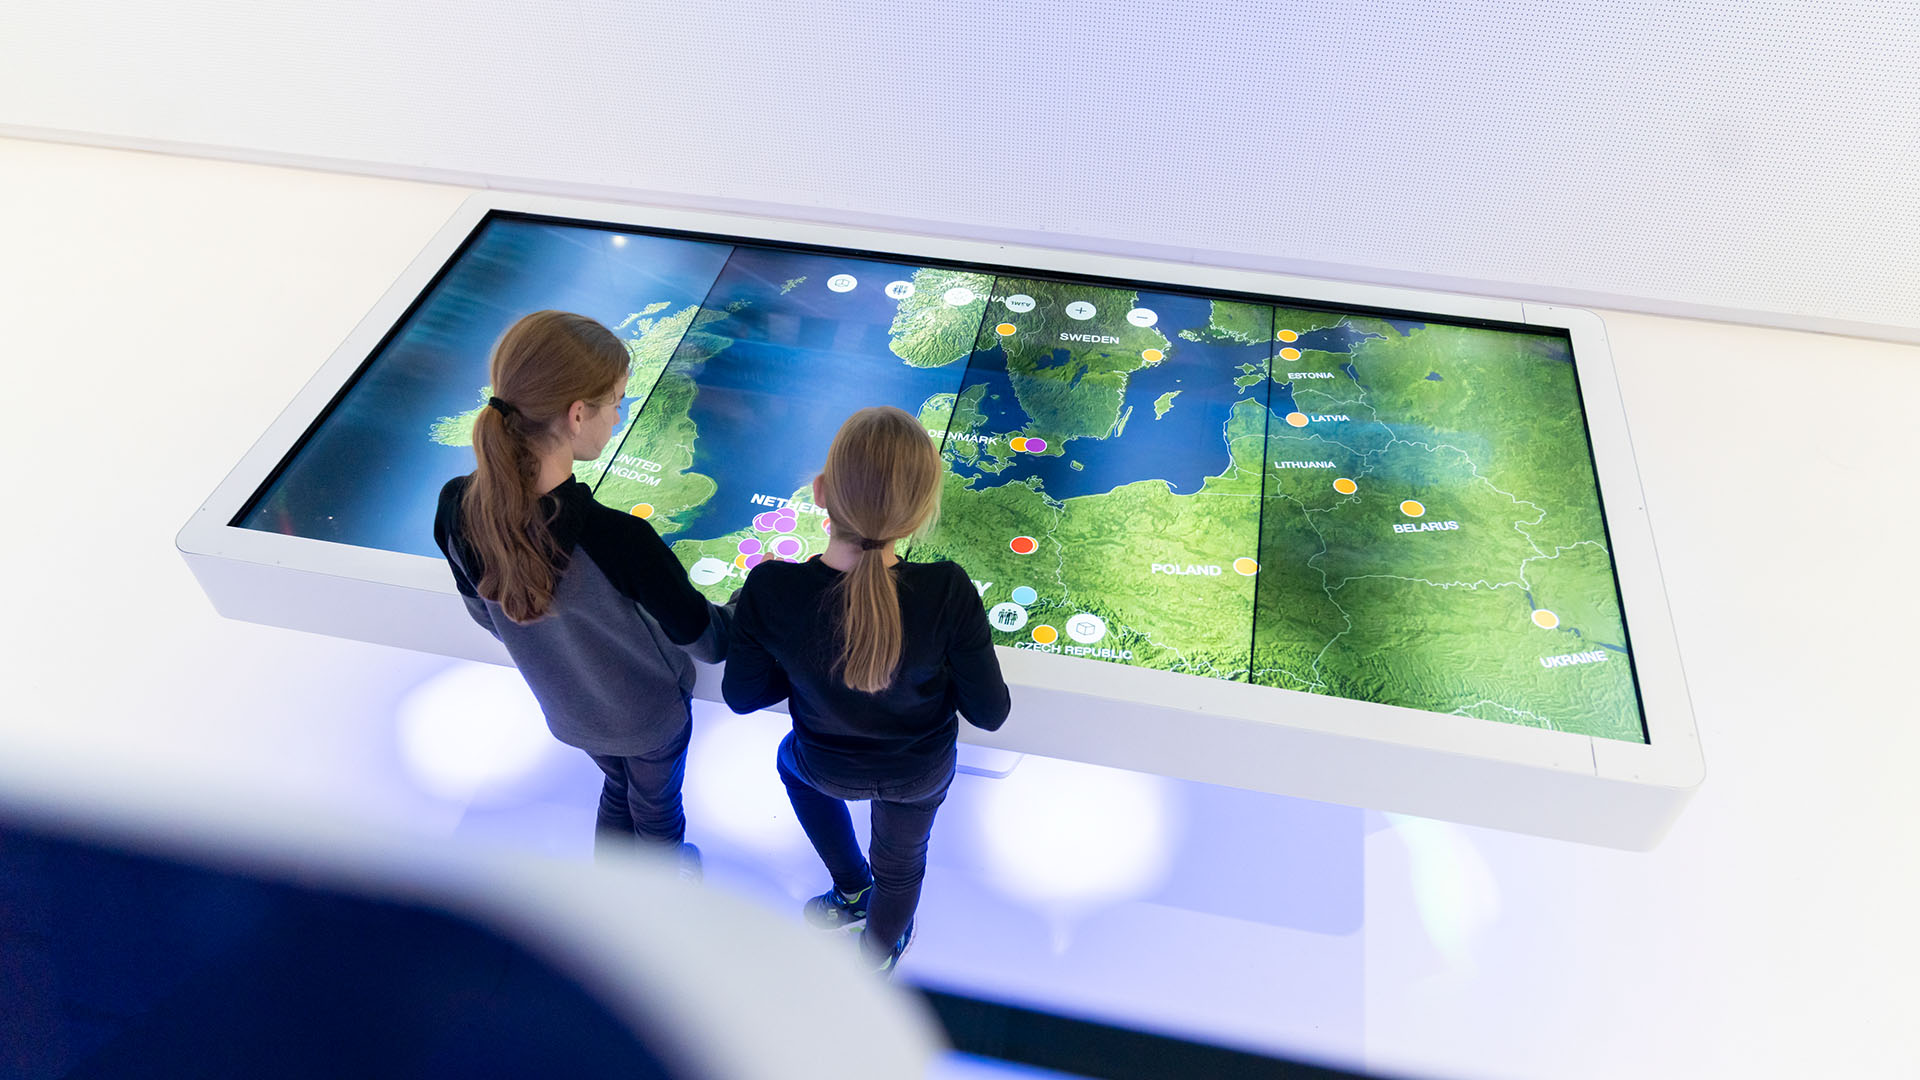 Two people interacting with a large, interactive digital map display at ASML's Experience Center, engaging with geographical information showing various locations and data points. 